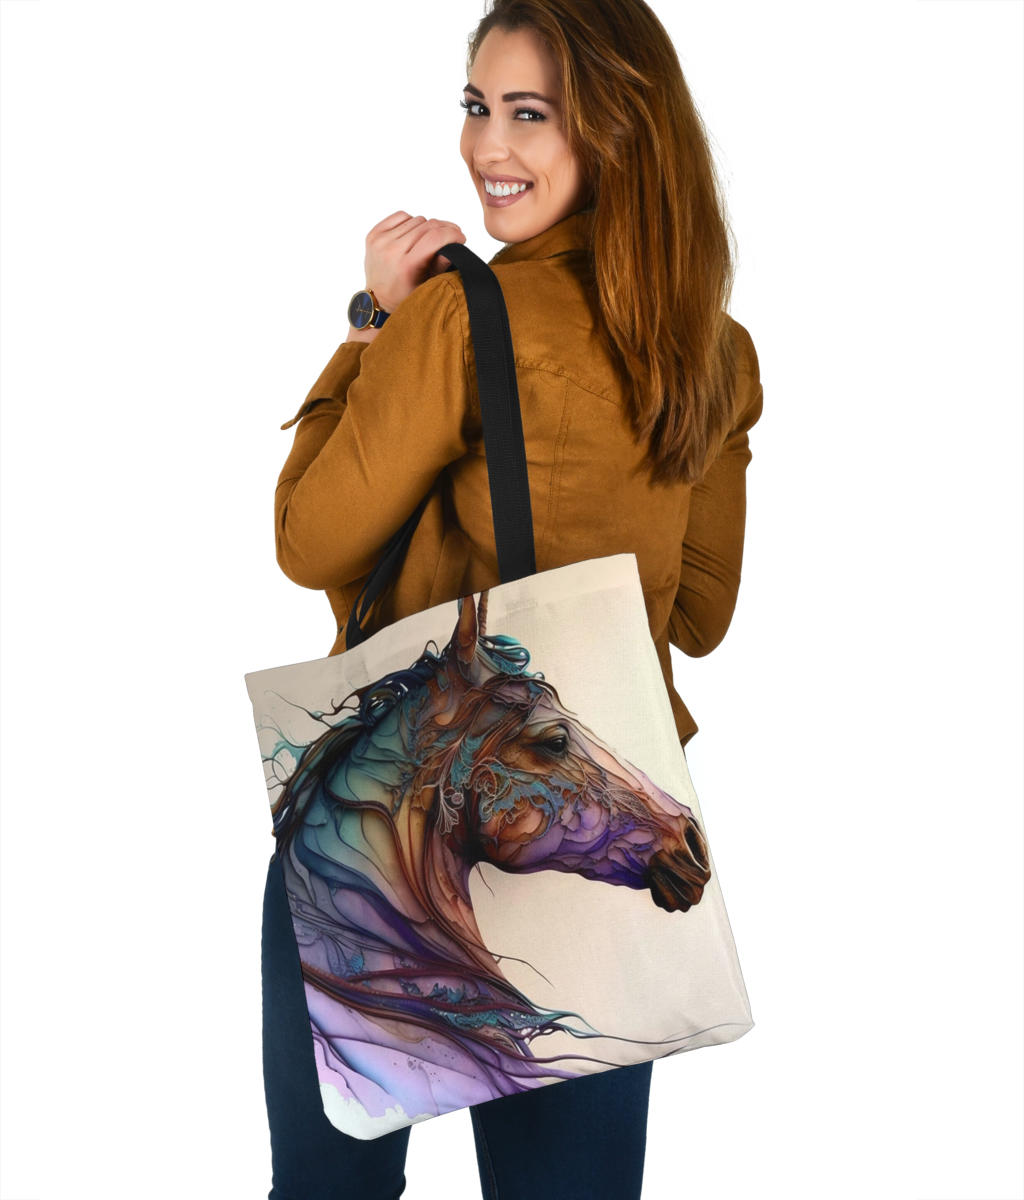 Alcohol Ink Painted Horse Design Tote Bags - Imagination Collection